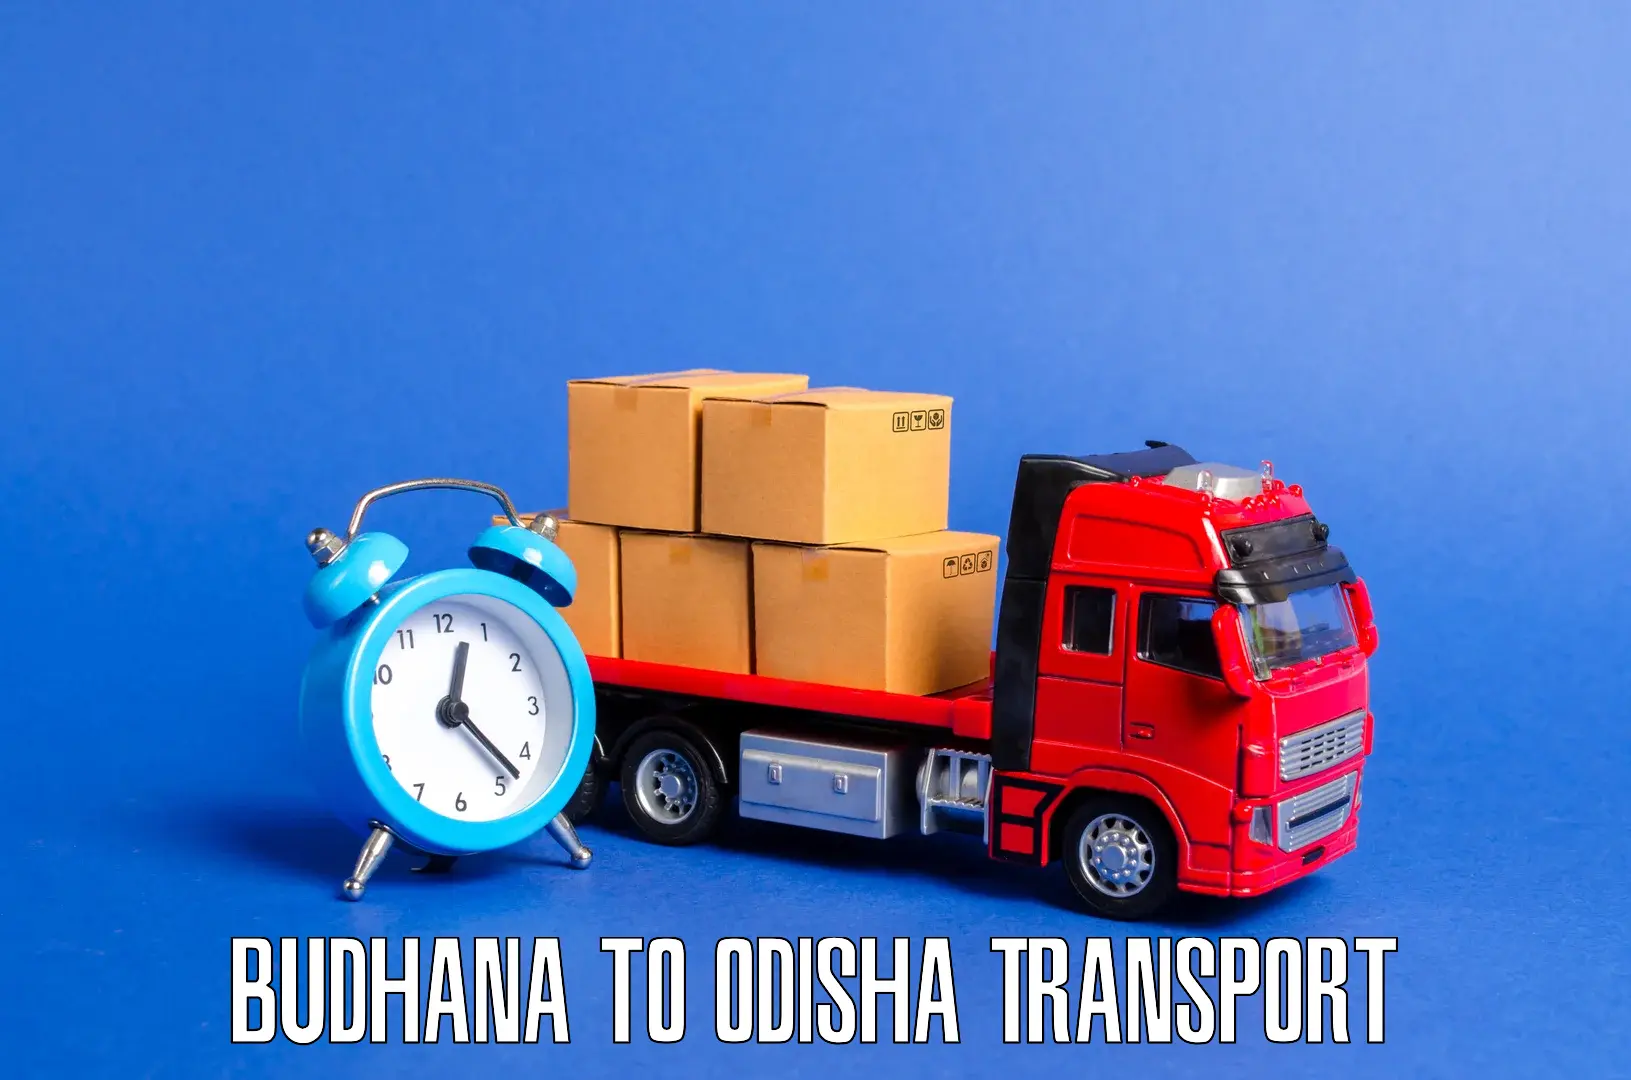 Lorry transport service in Budhana to Bheden